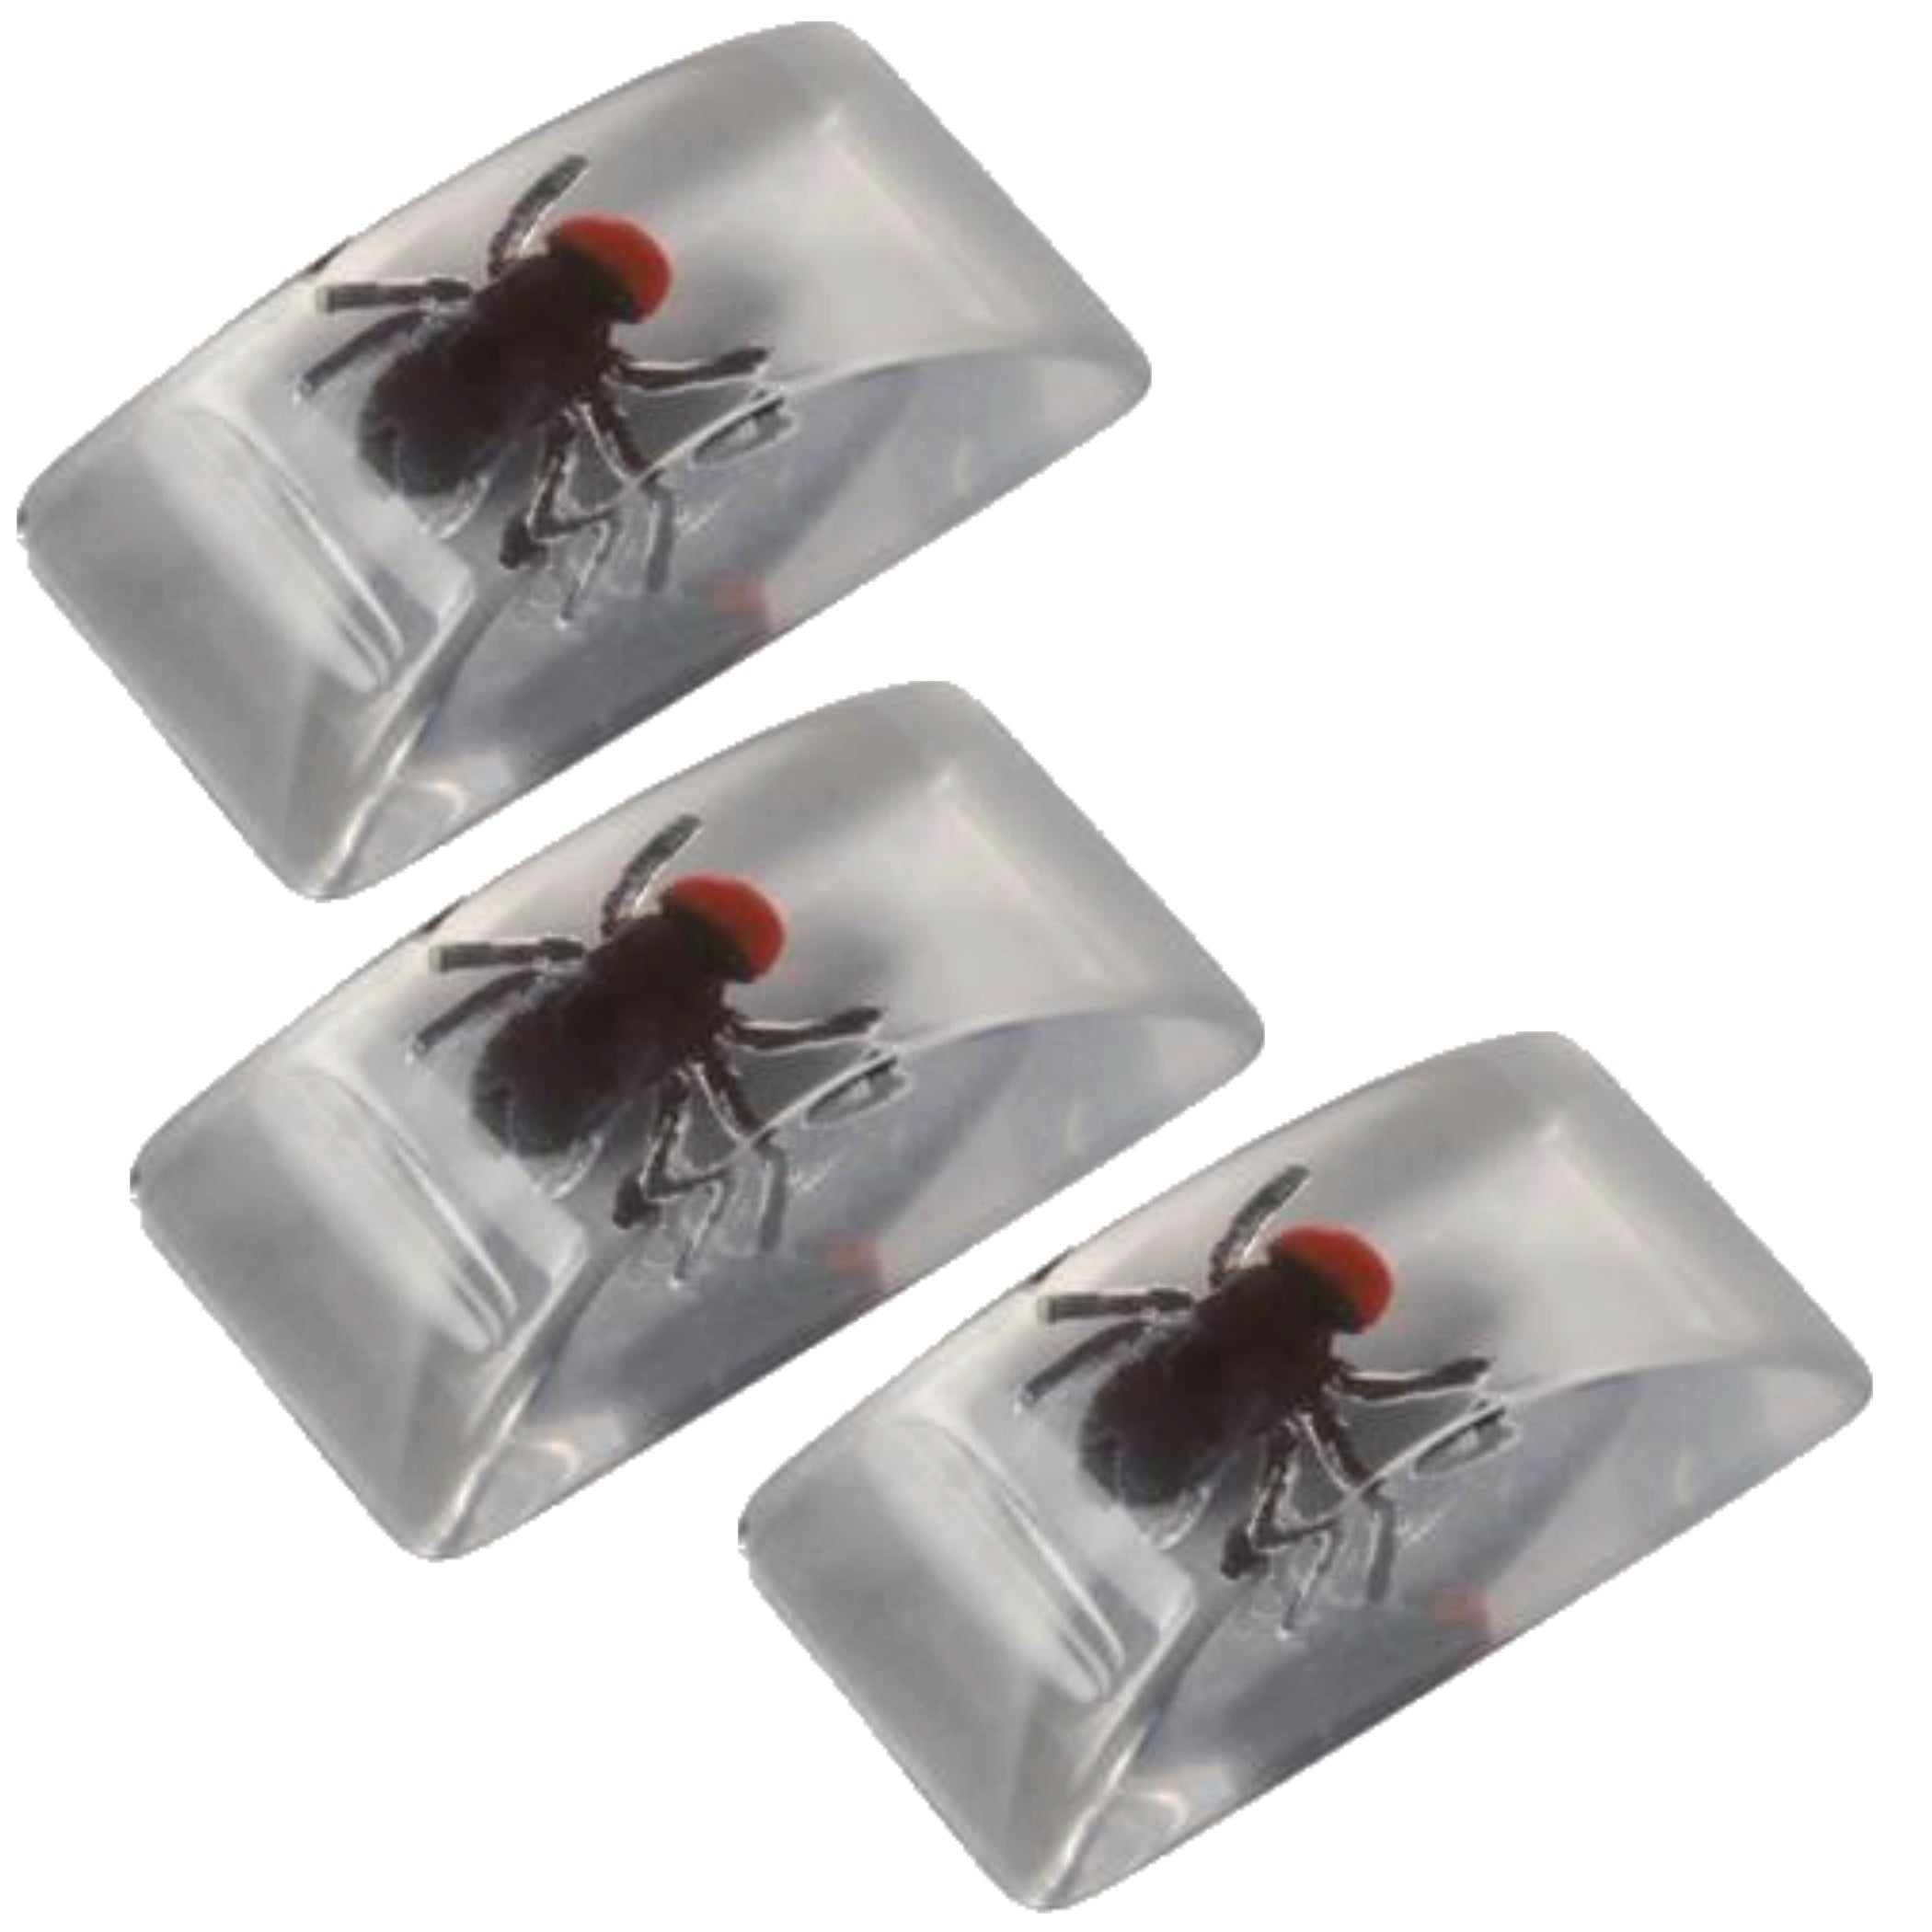 Bug In Ice Cube 3 pack - GagWorks